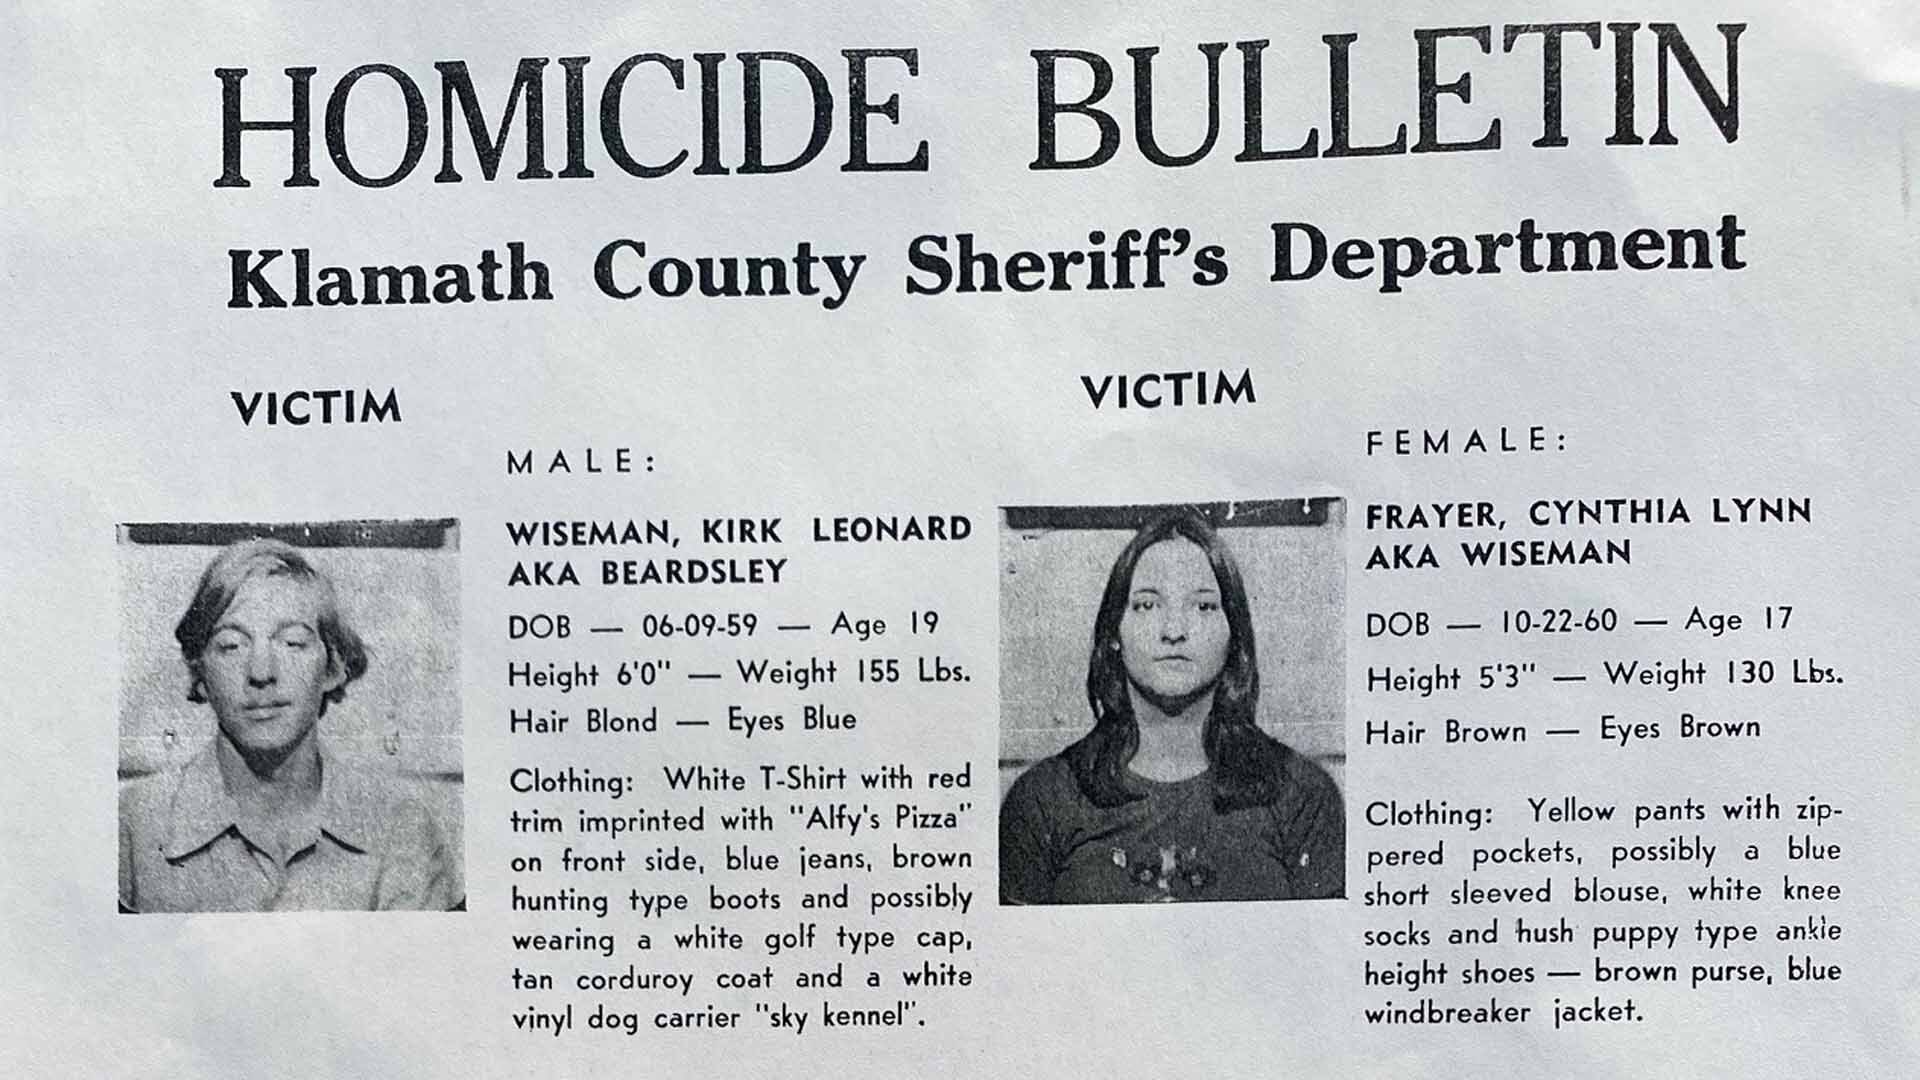 [IMAGE] DNA evidence brings closure to Klamath County cold case